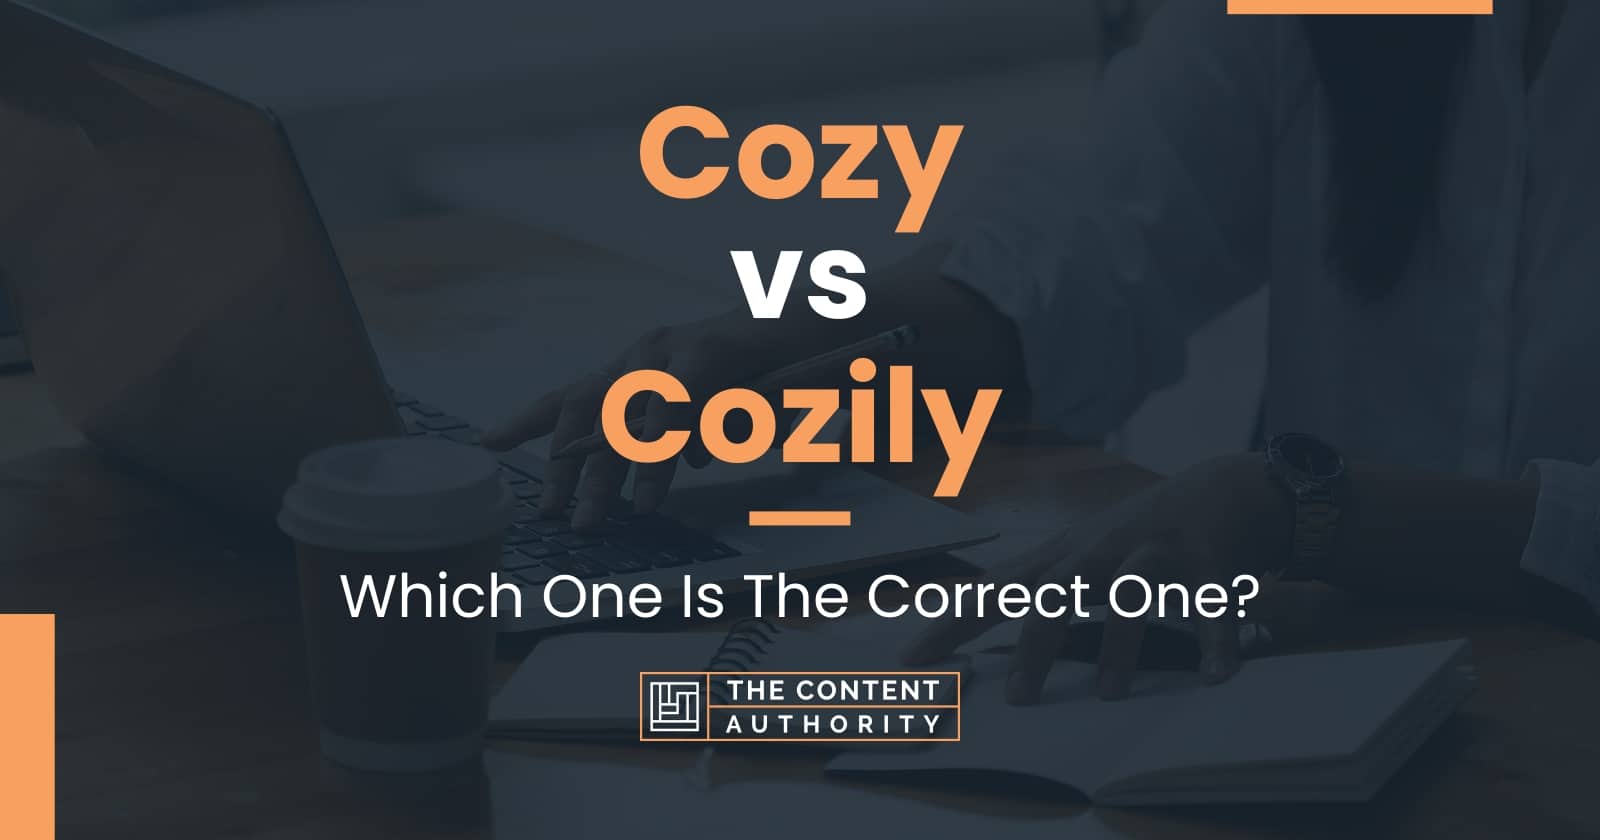 Cozy vs Cozily: Which One Is The Correct One?